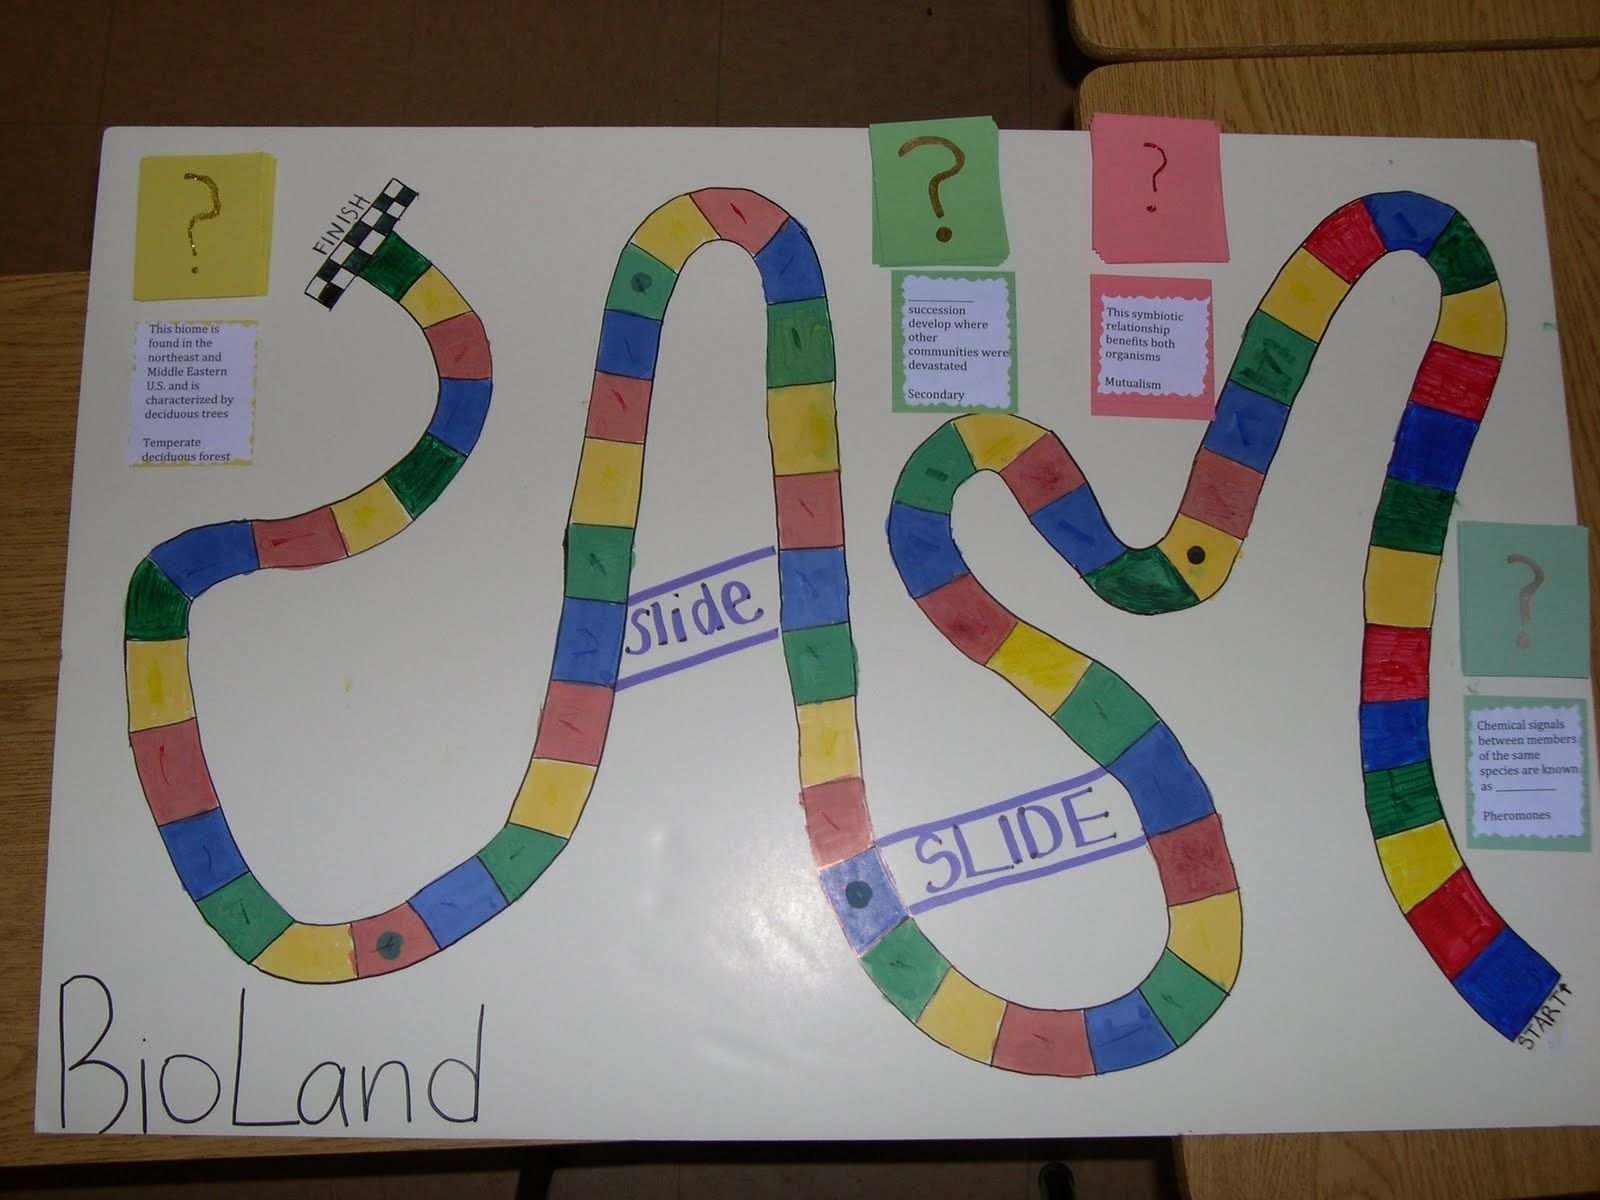 10 Famous Board Game Ideas For School Projects science game boards yahoo image search results classroom ideas 2022